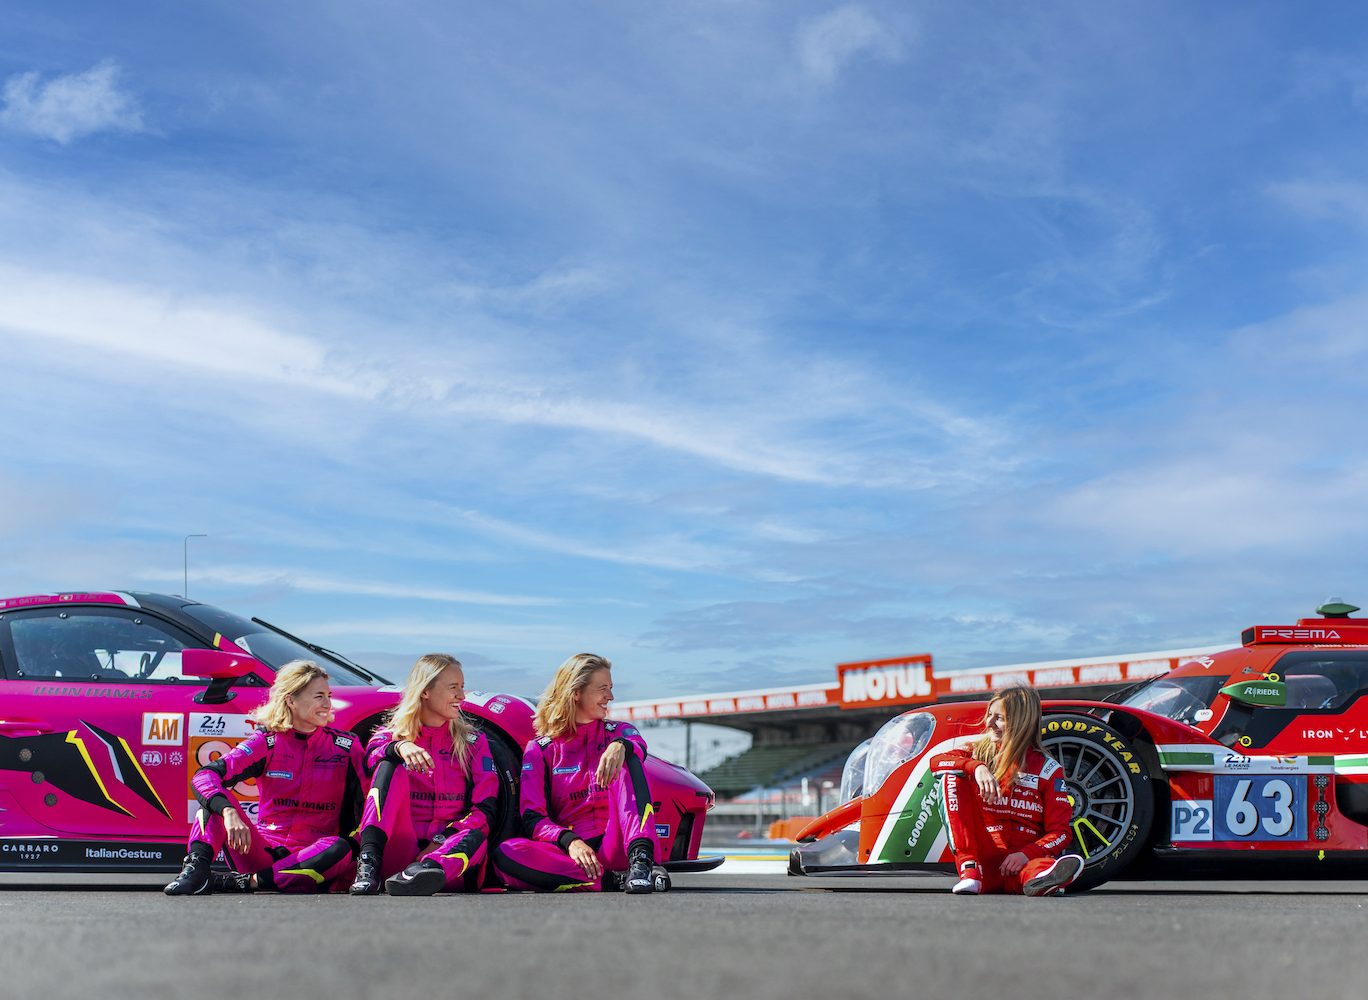 BEST RESULT SO FAR FOR THE IRON DAMES IN THE 24 HOURS OF LE MANS